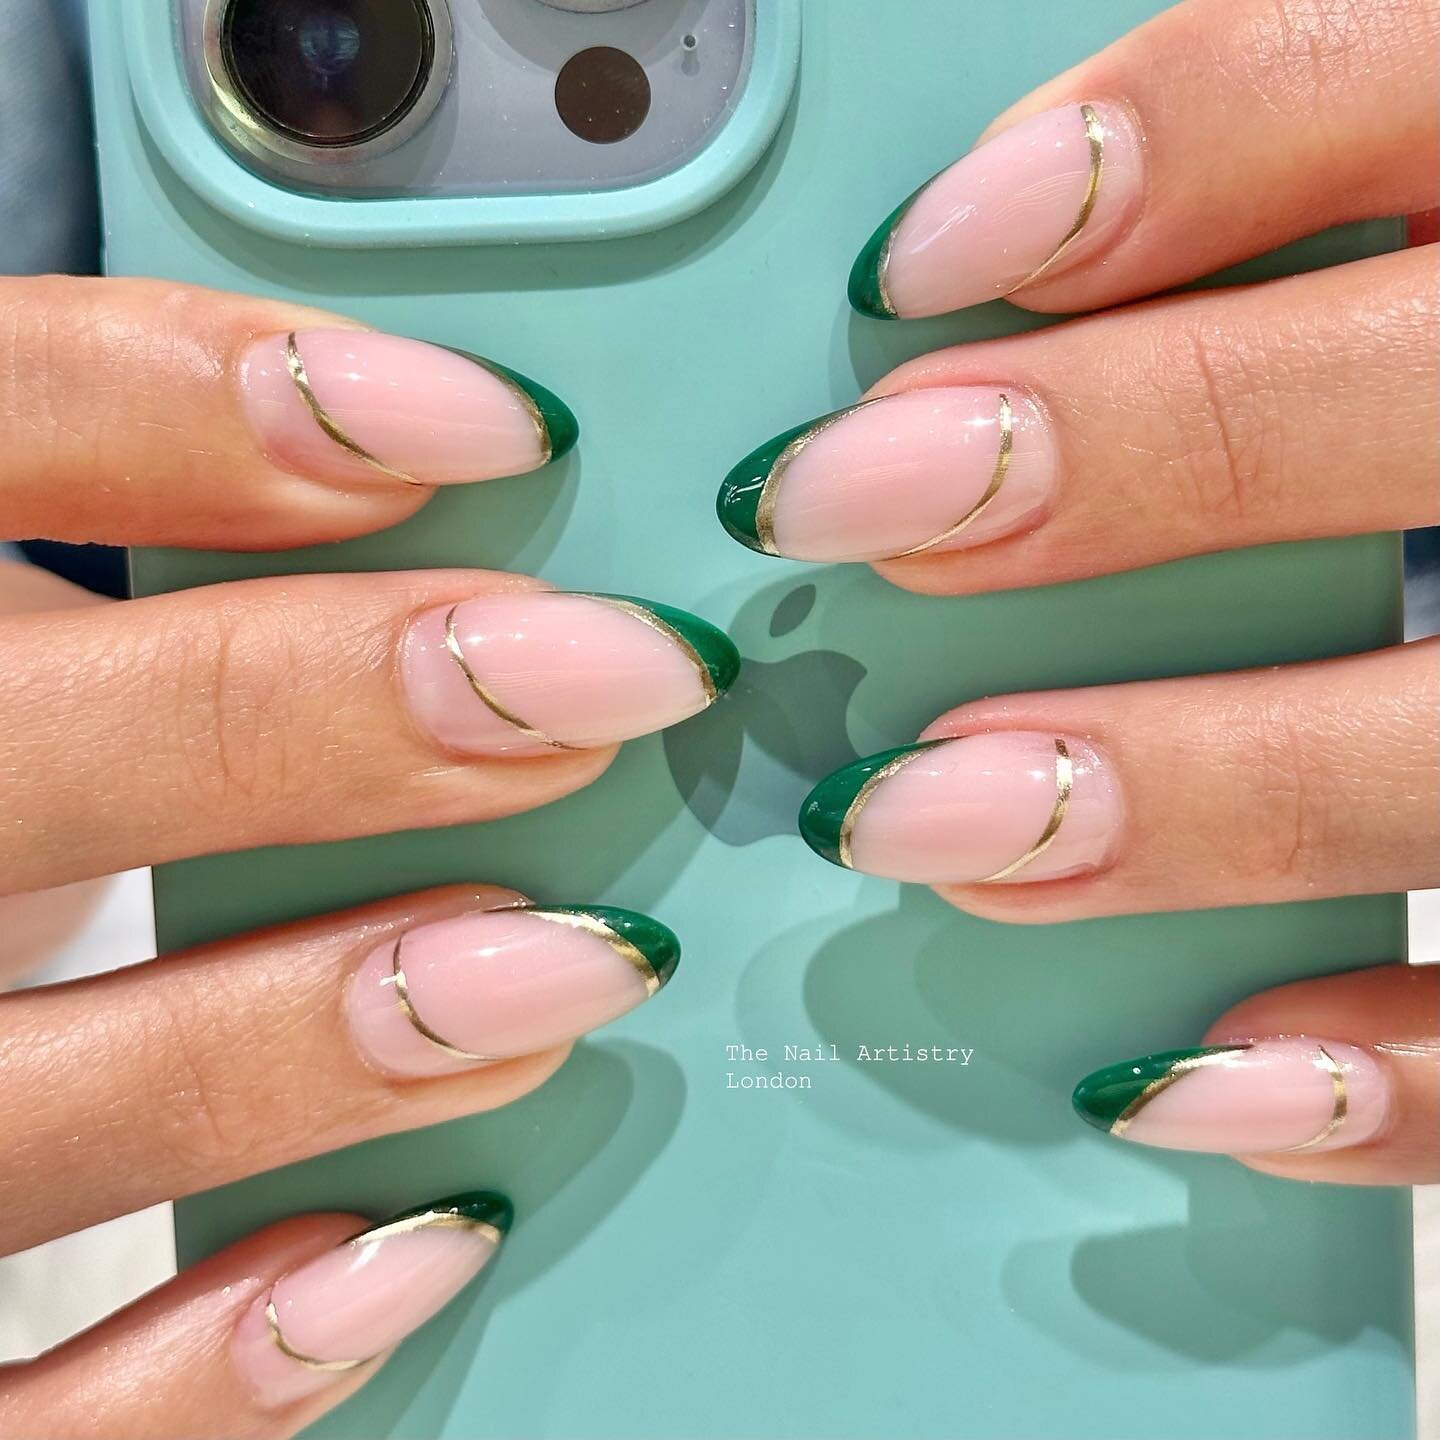 𝐆𝐫𝐞𝐞𝐧 &amp; 𝐆𝐨𝐥𝐝 🍀✨

📲 To book for Nail Arts: Select the treatment you want + Add-on Nail Arts (price varies depending on the whole set designs) 
☎️ 020 7018 6636 
.
.
.
.
.
#nails #londonnails #greennails #gold #goldnails #nailart #nailsd